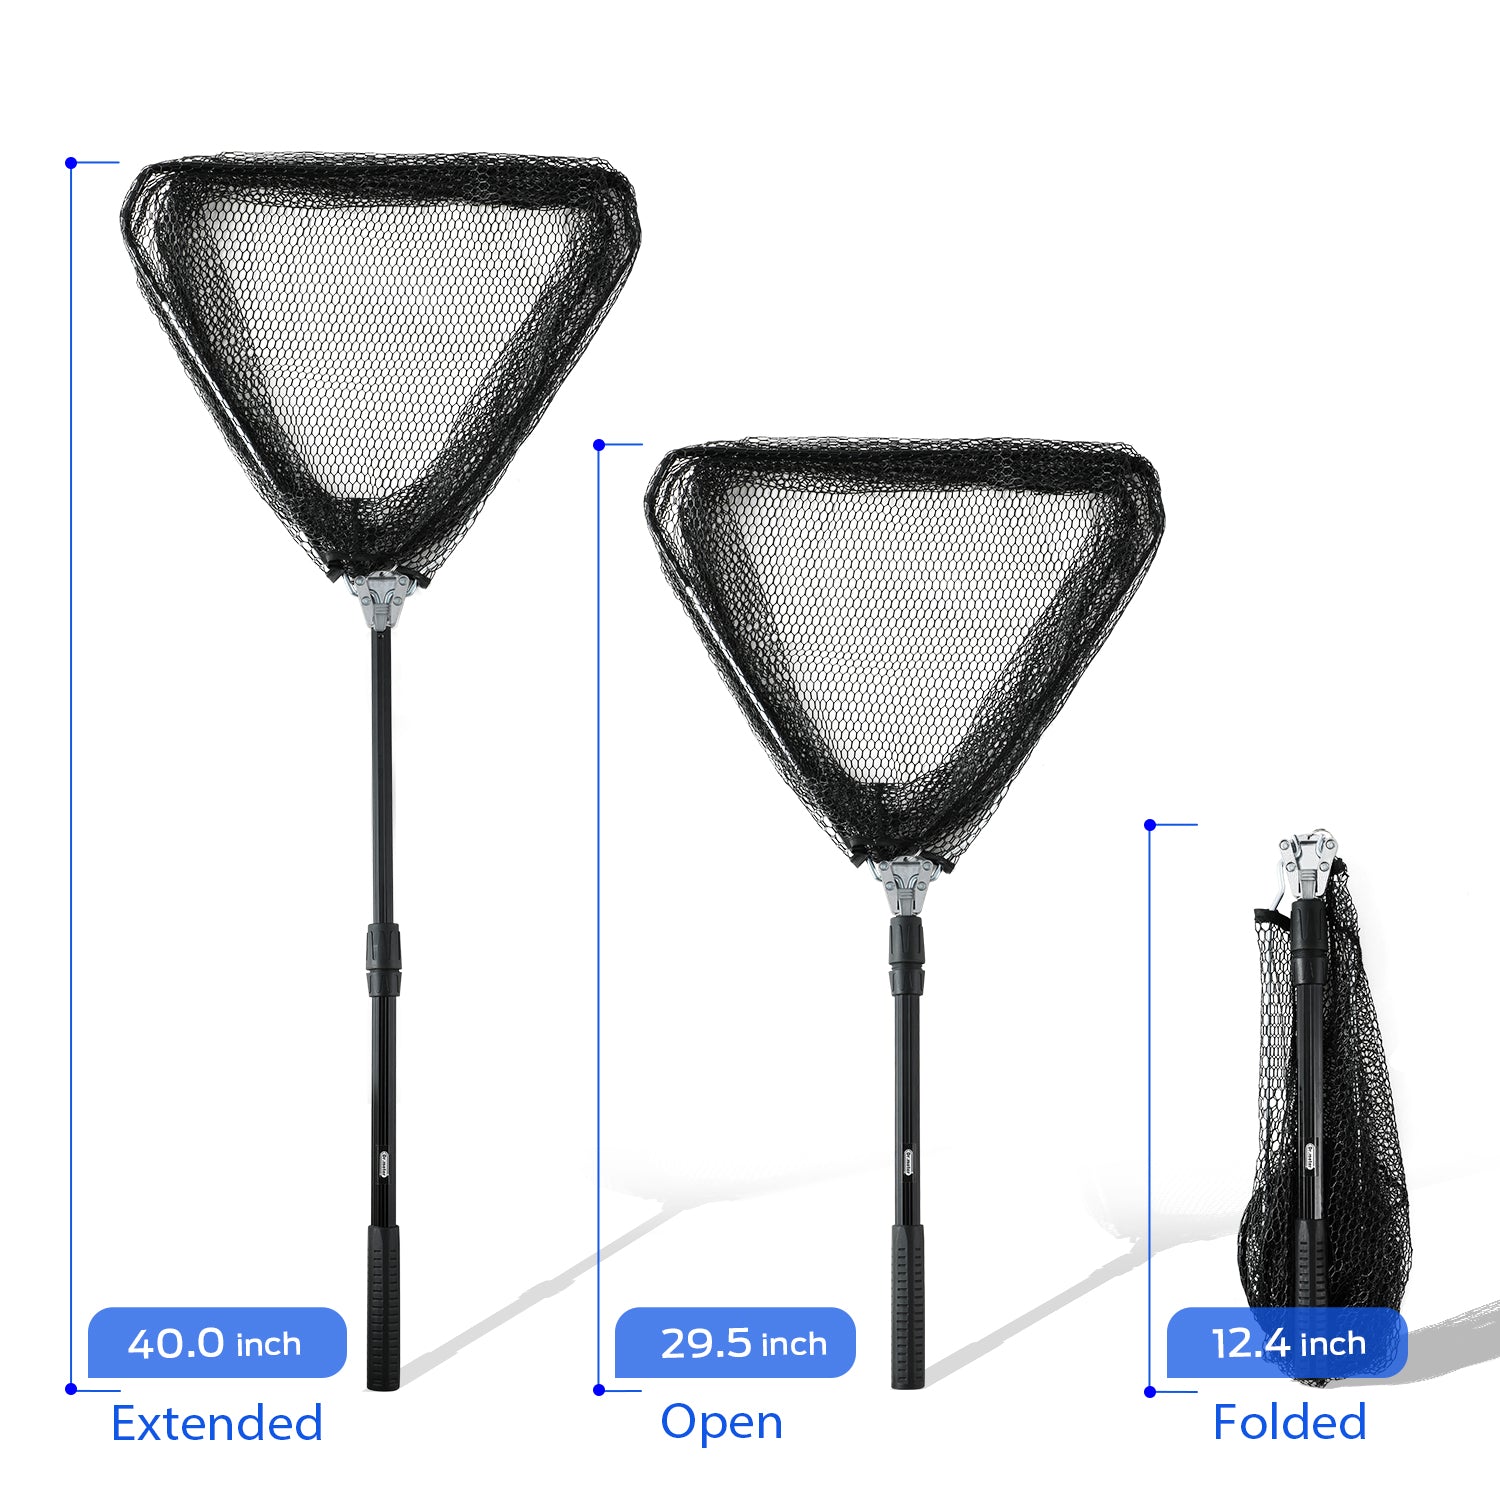 Fishing Net, Light Weight Portable Fish Landing Net with Telescopic Po –  Dr.meter